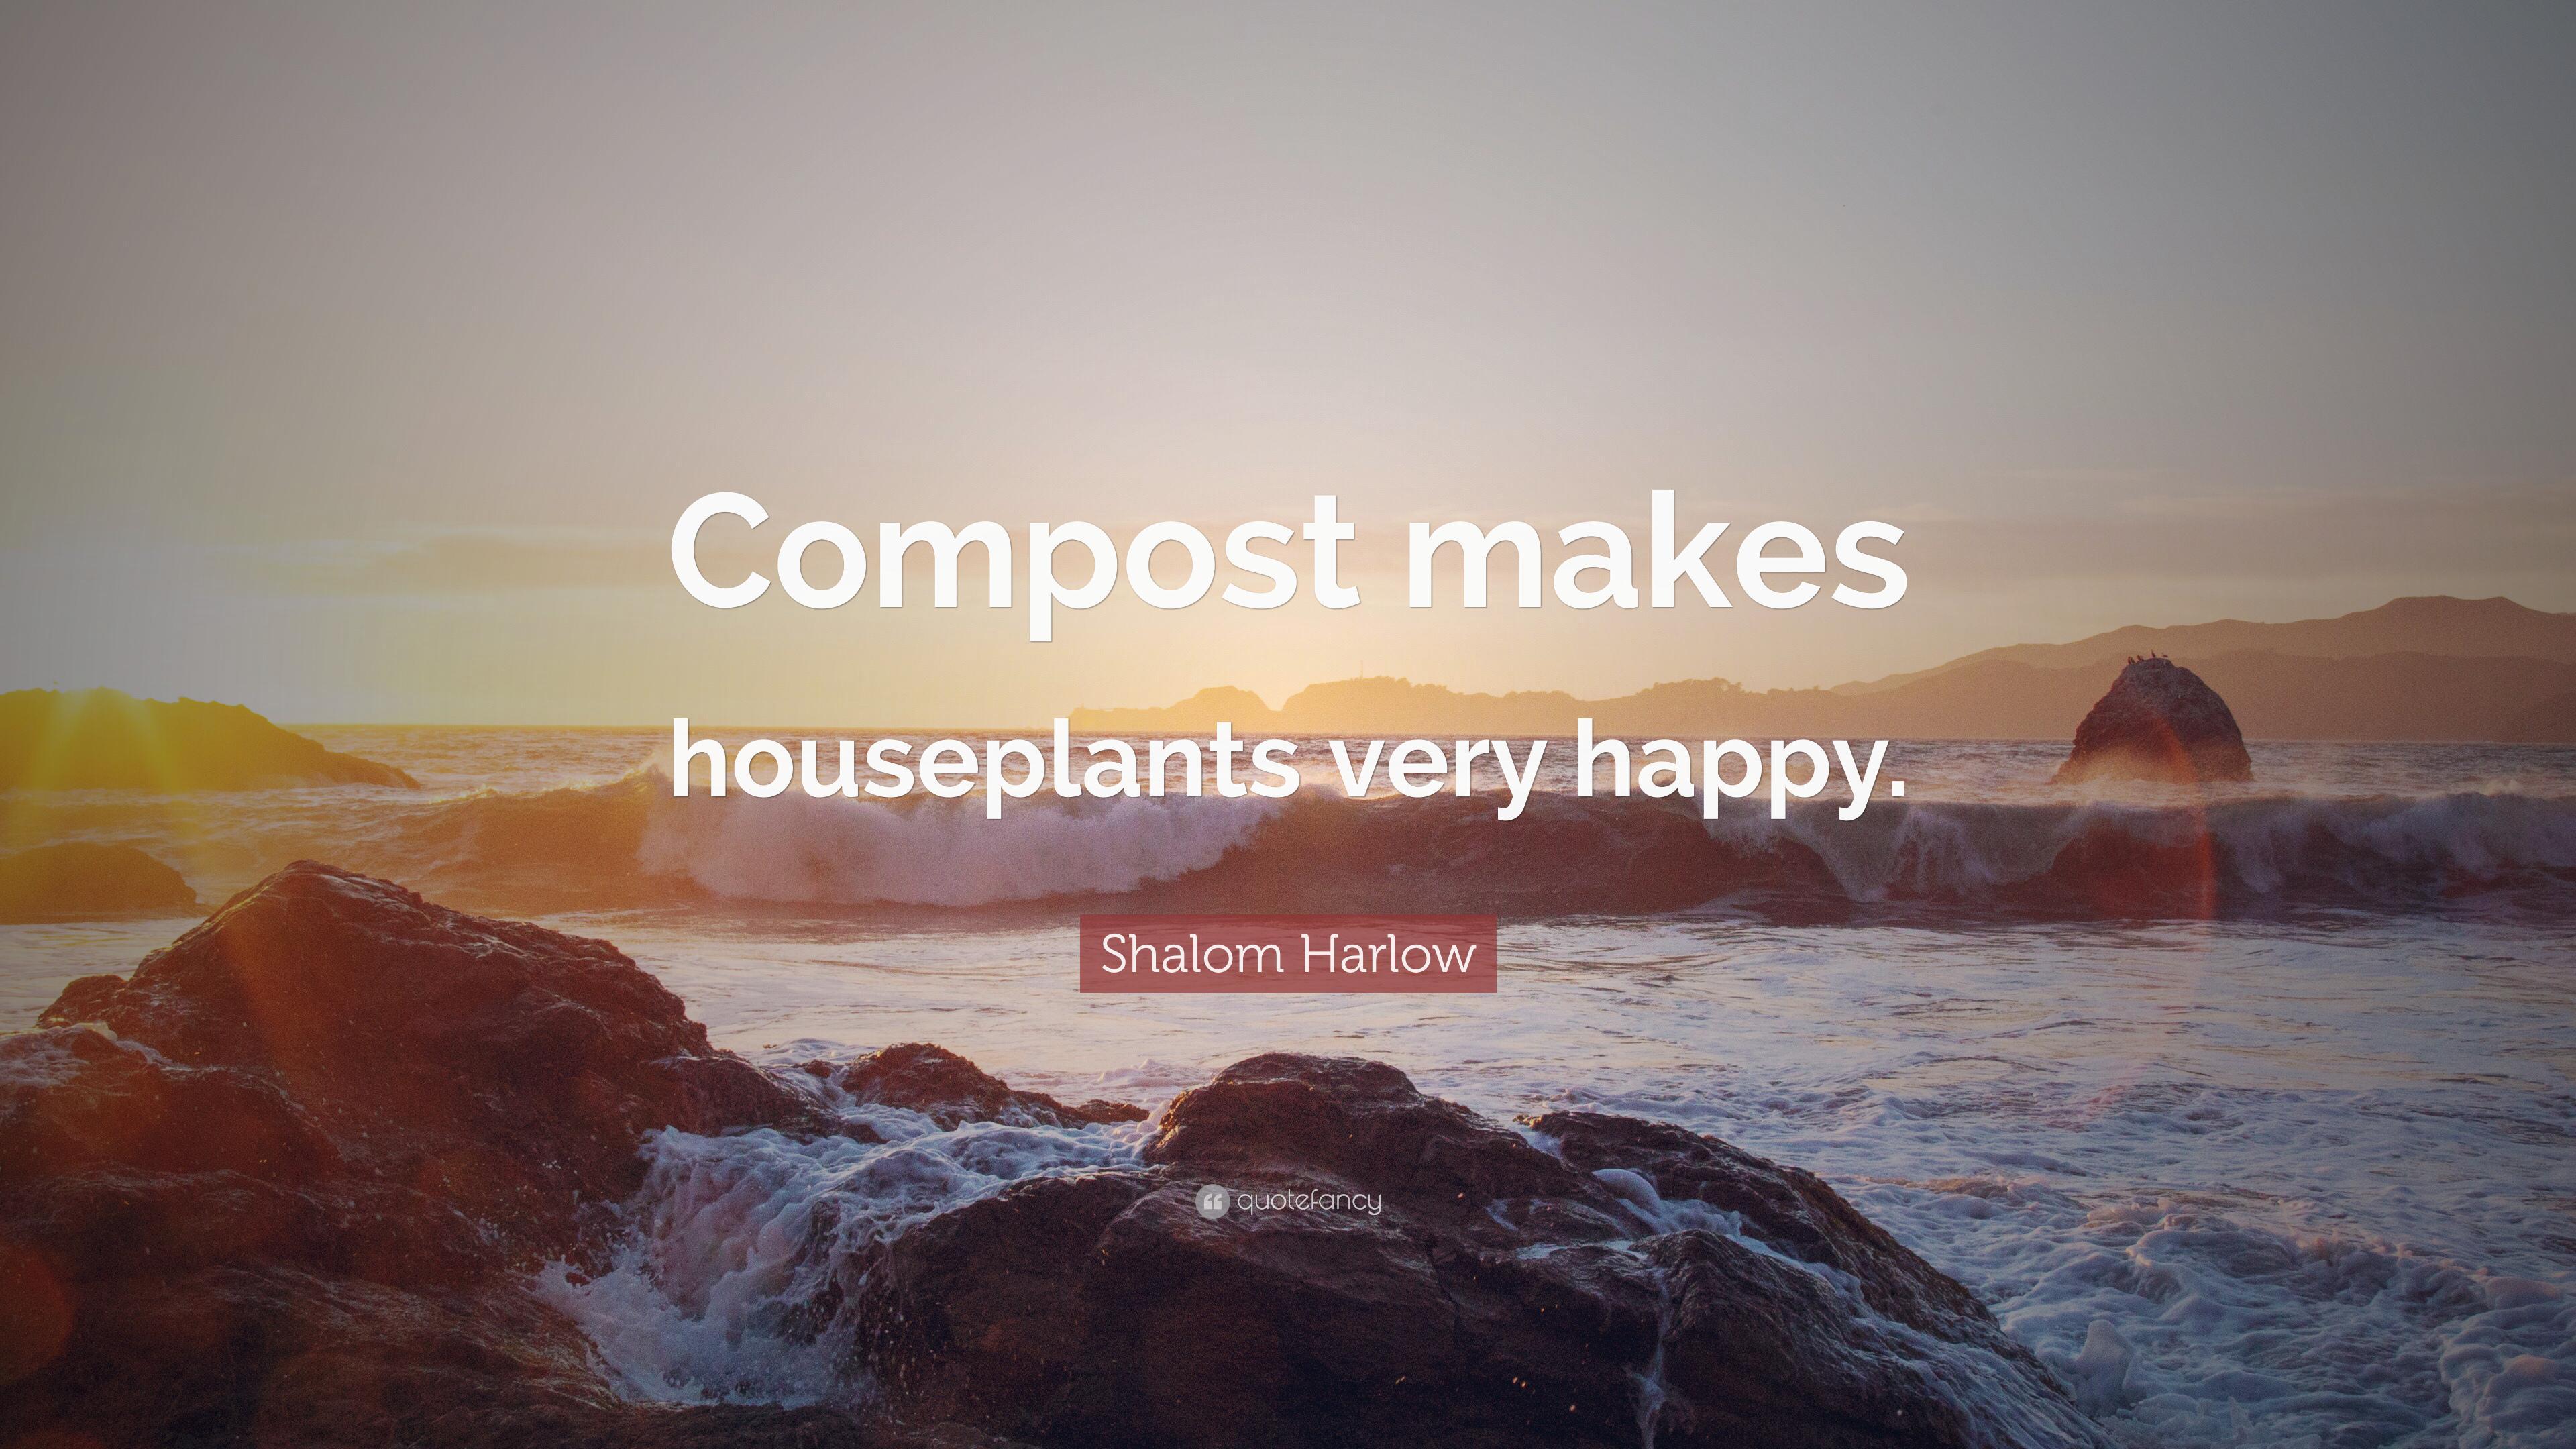 Shalom Harlow Quote: “Compost makes houseplants very happy.” 7